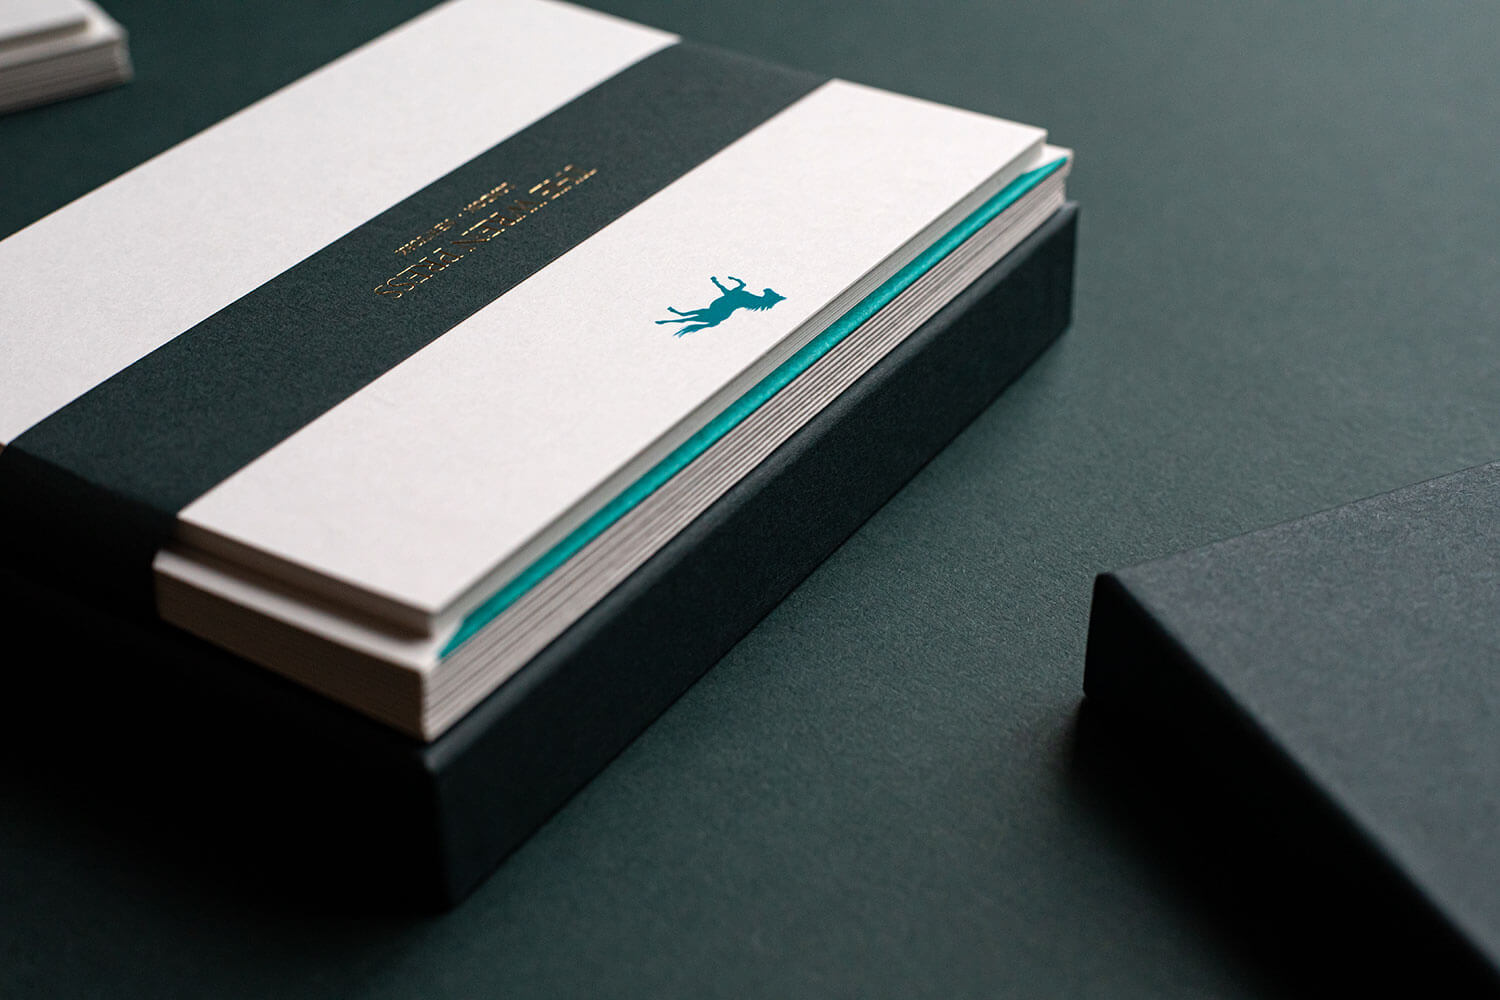 Teal Horse Correspondence Cards 6 x 4.25 inch